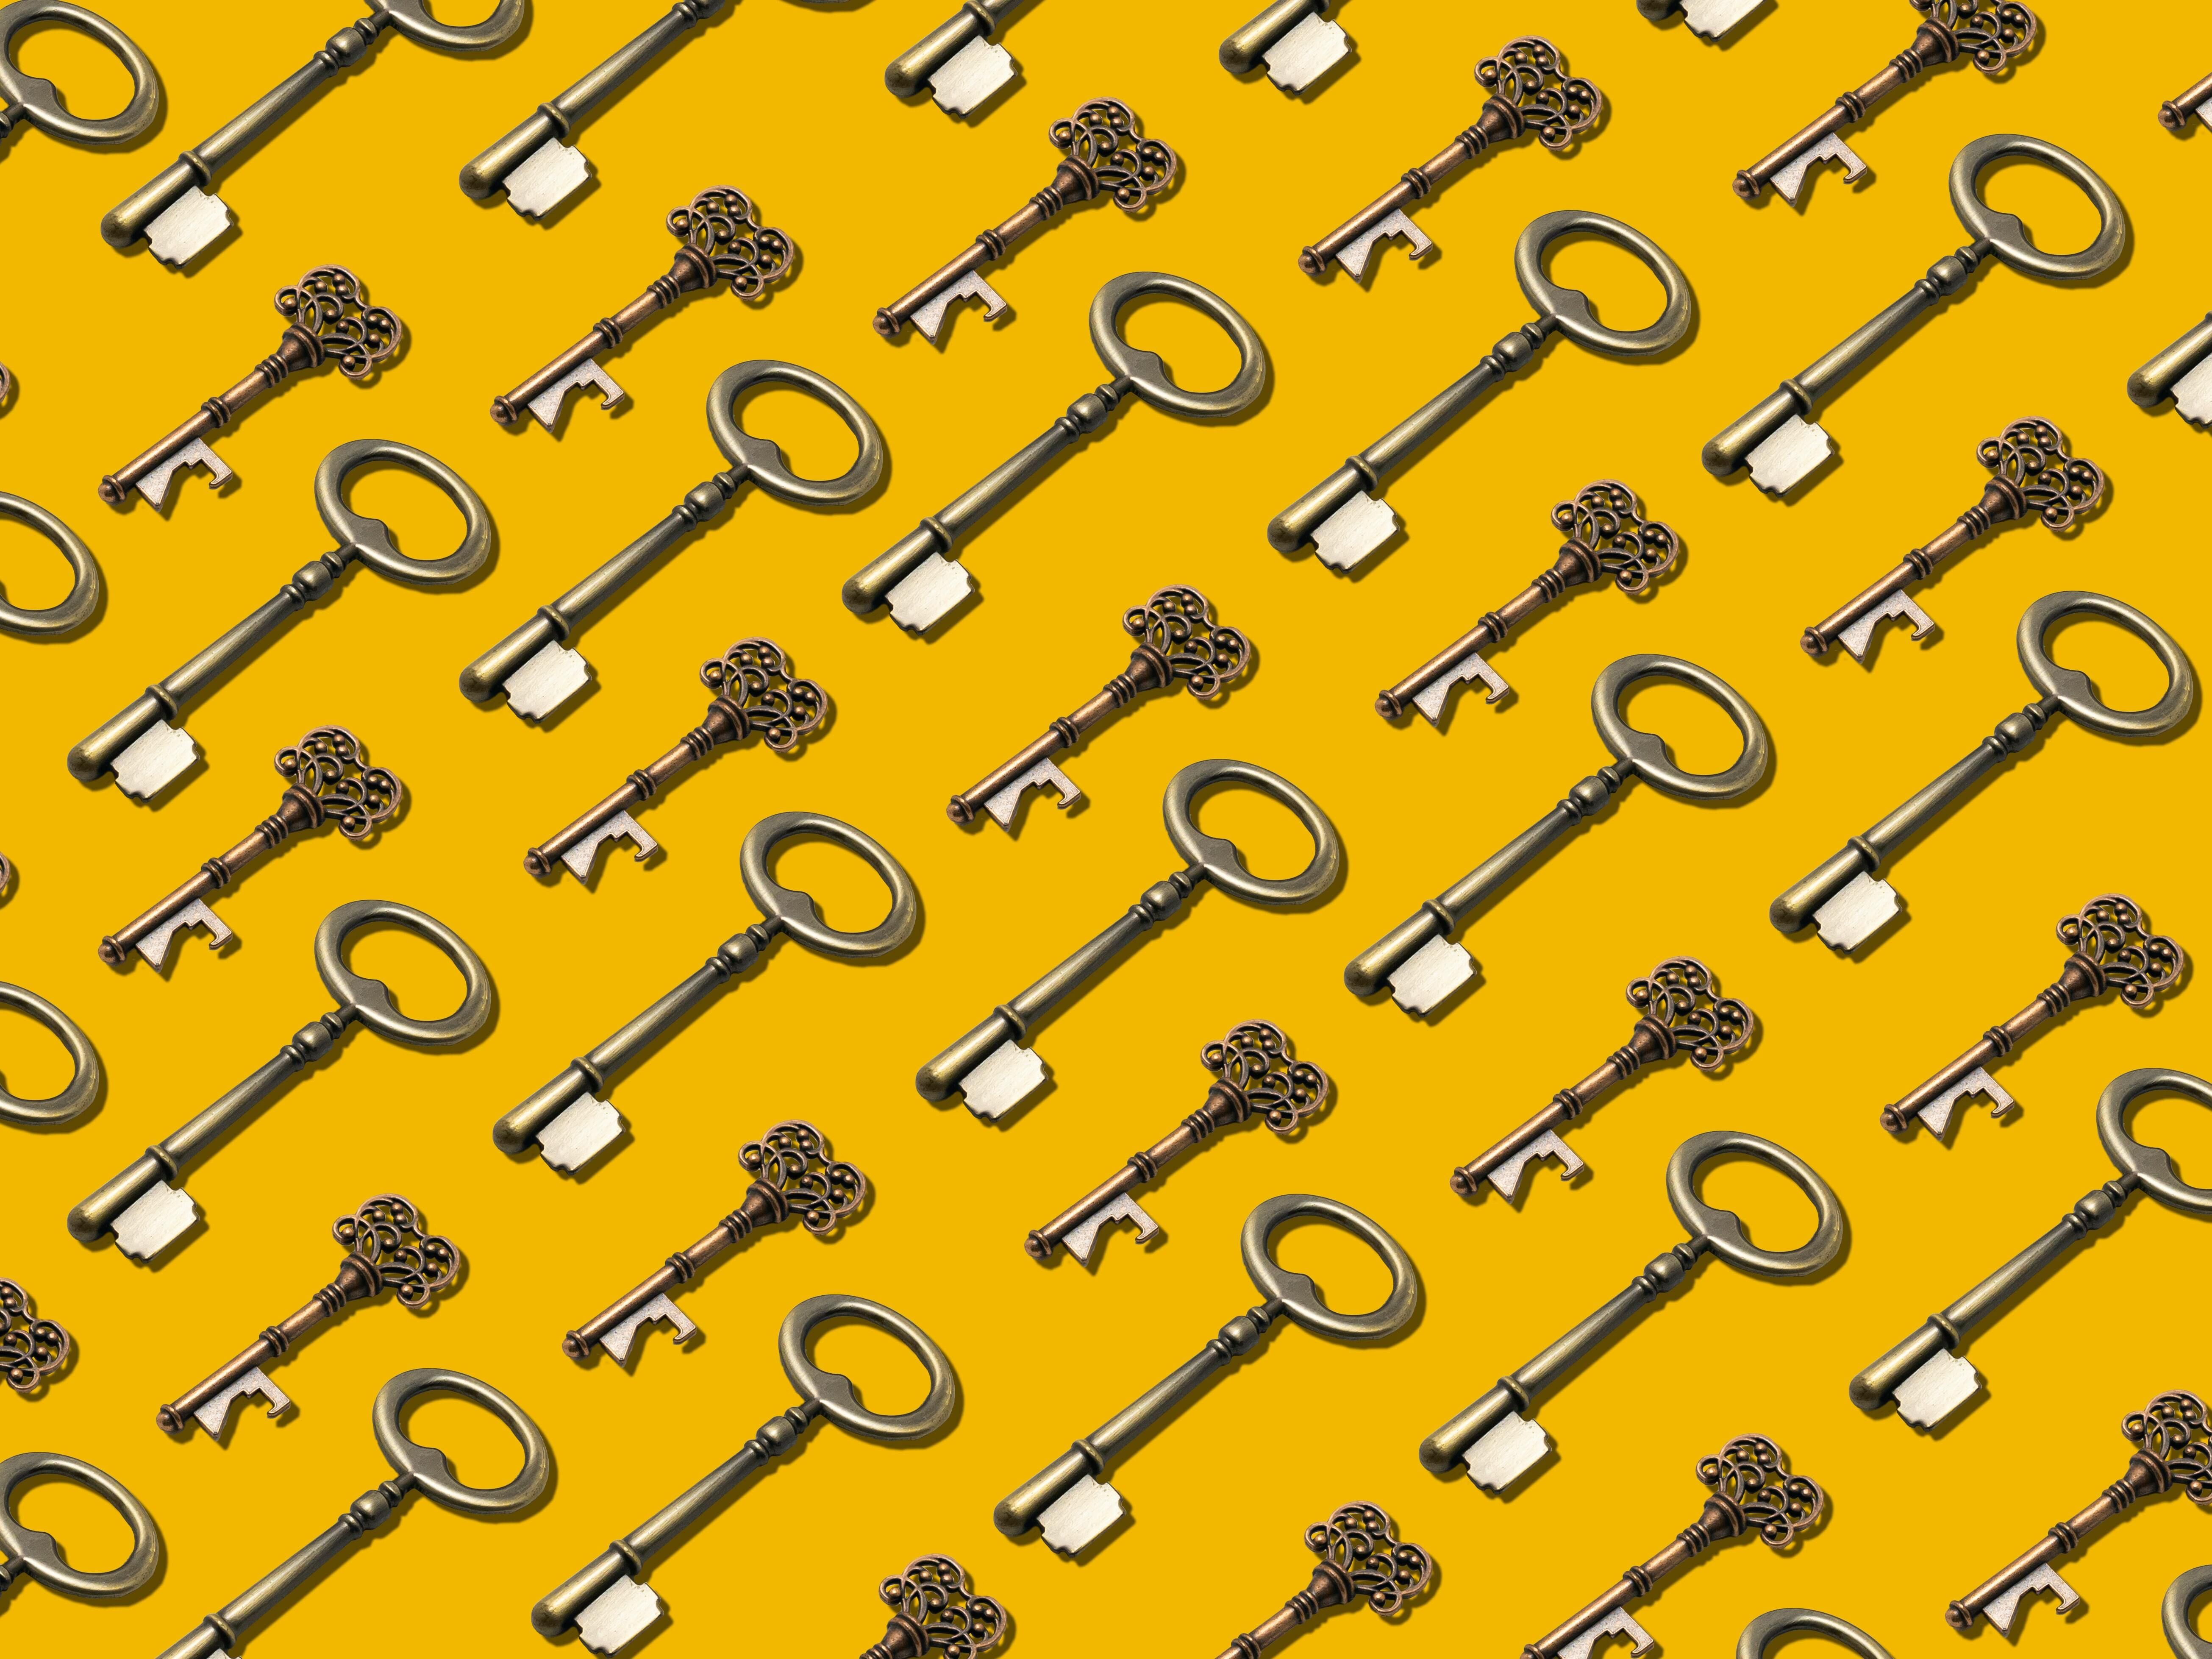 Graphic of repeating old-fashioned keys laid out diagonally against a bright yellow background